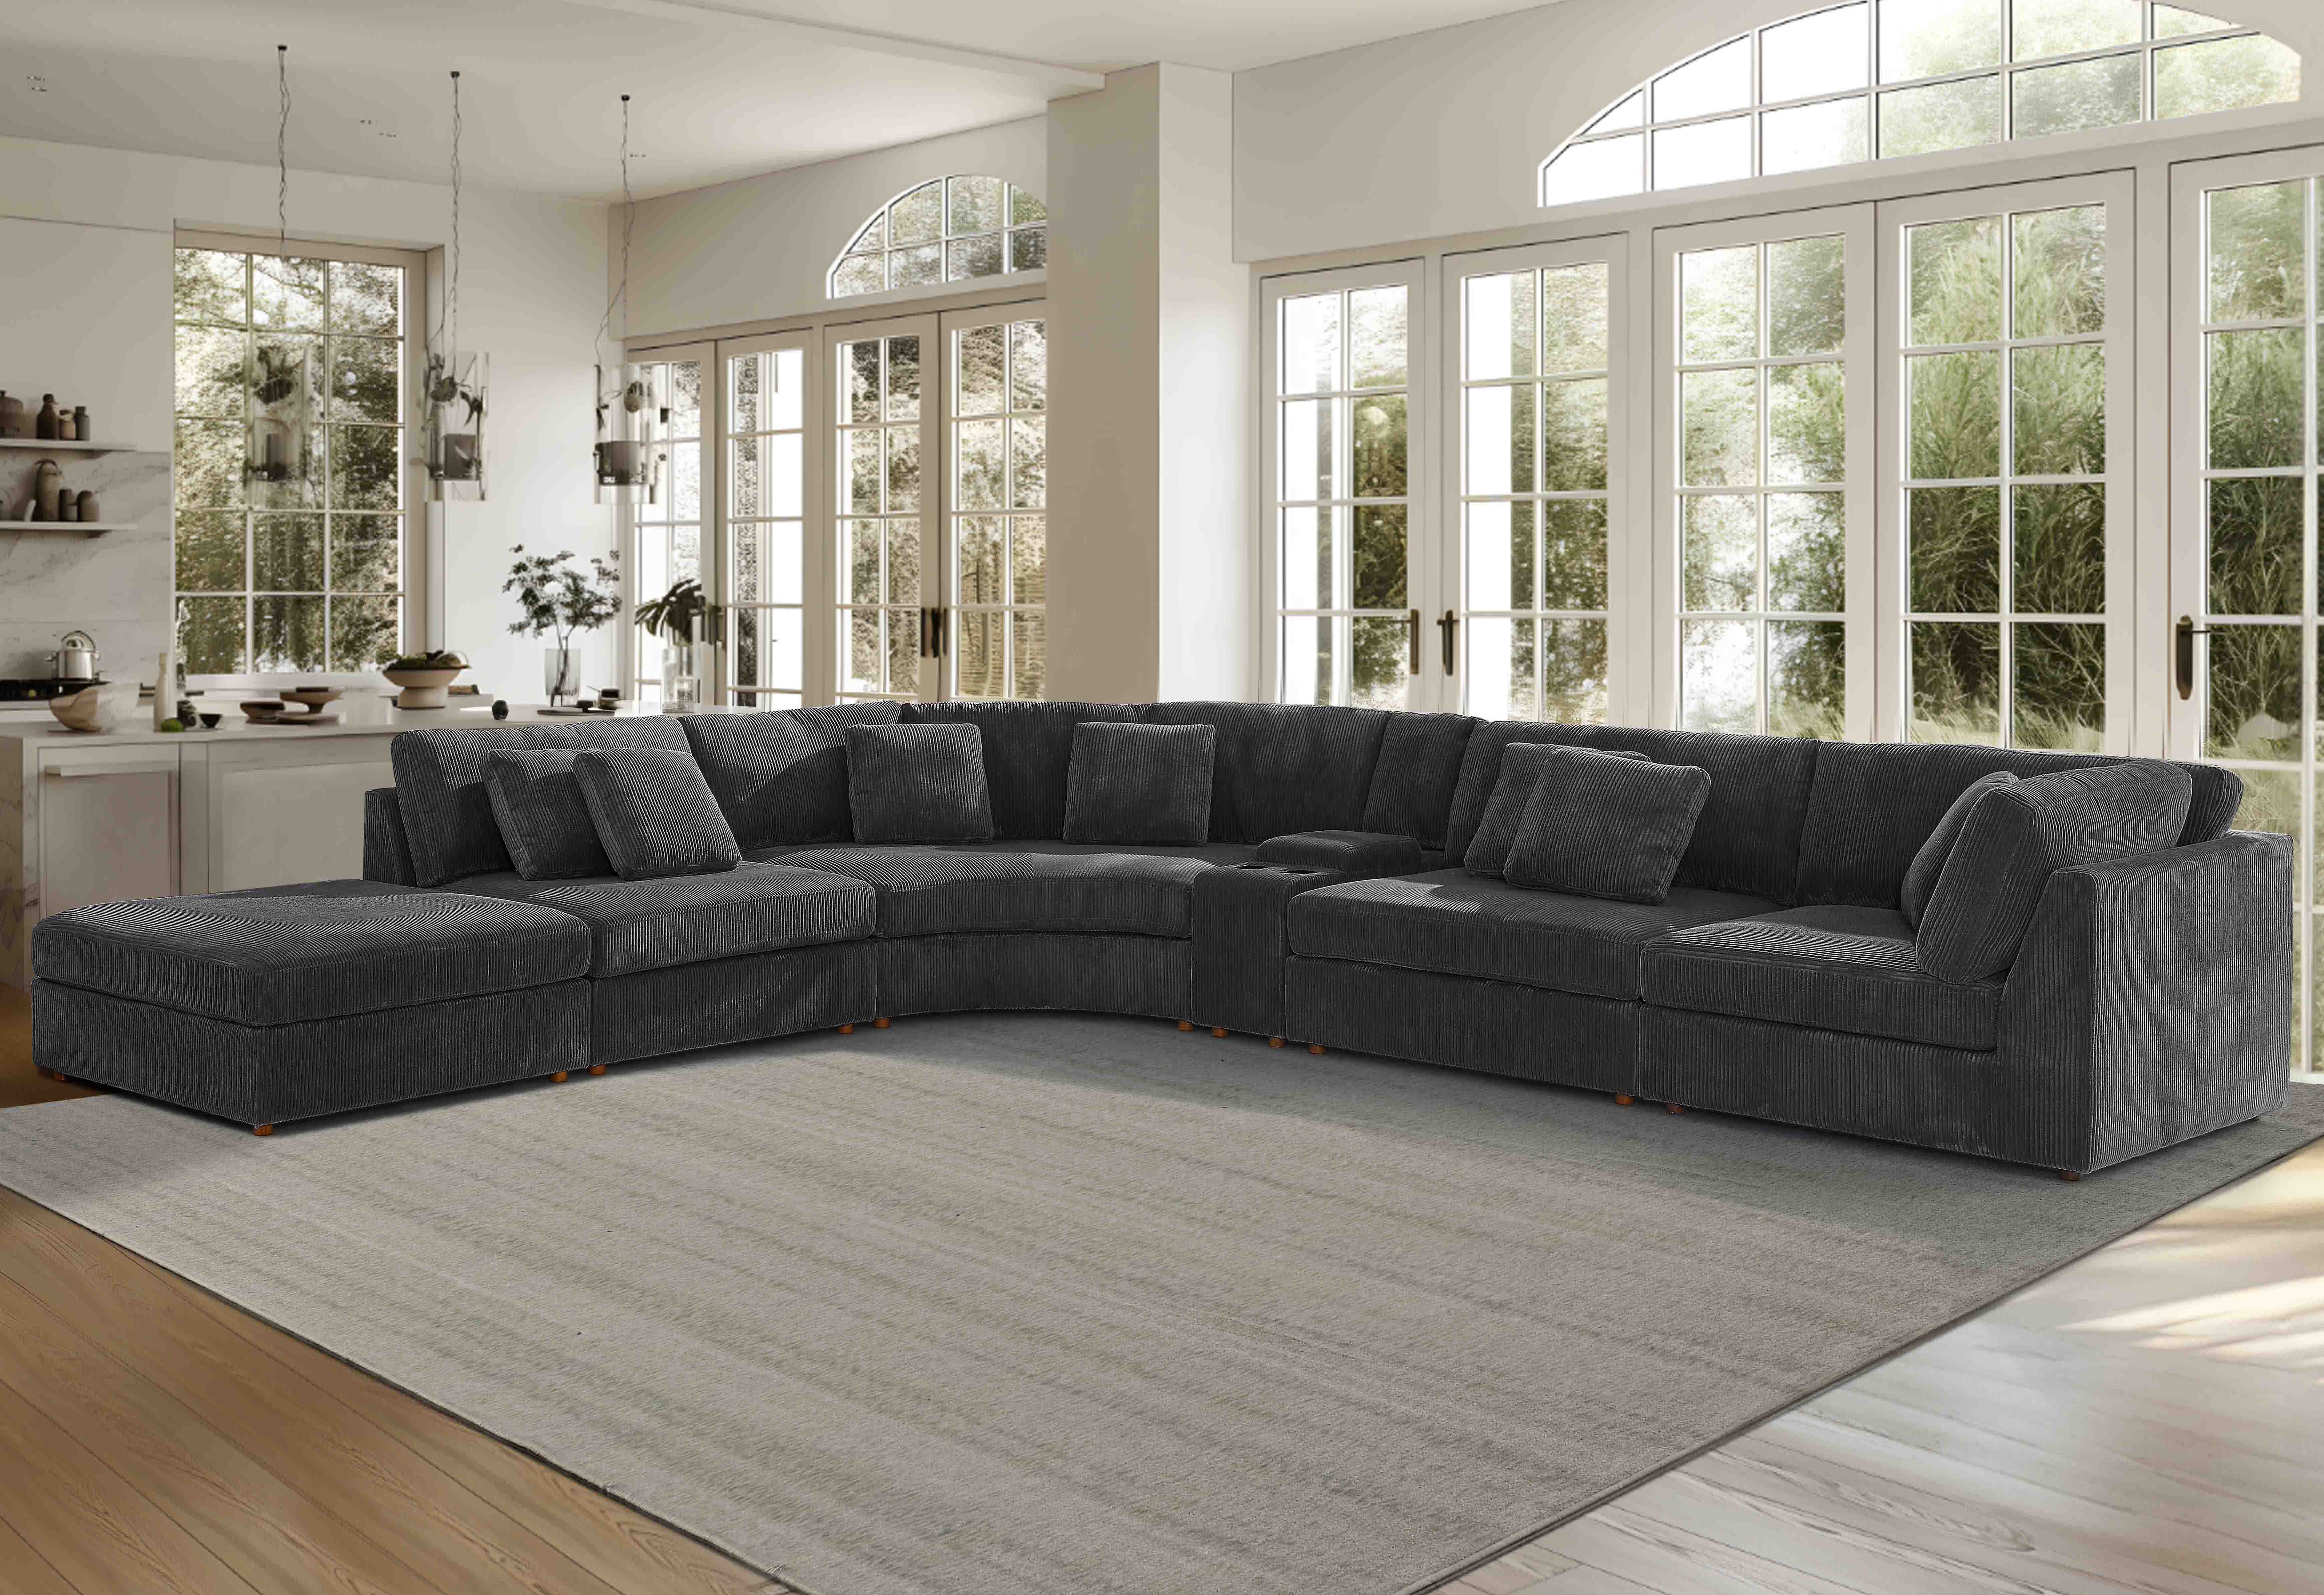 Unlimited creativity, create your ideal living room with modular sofas